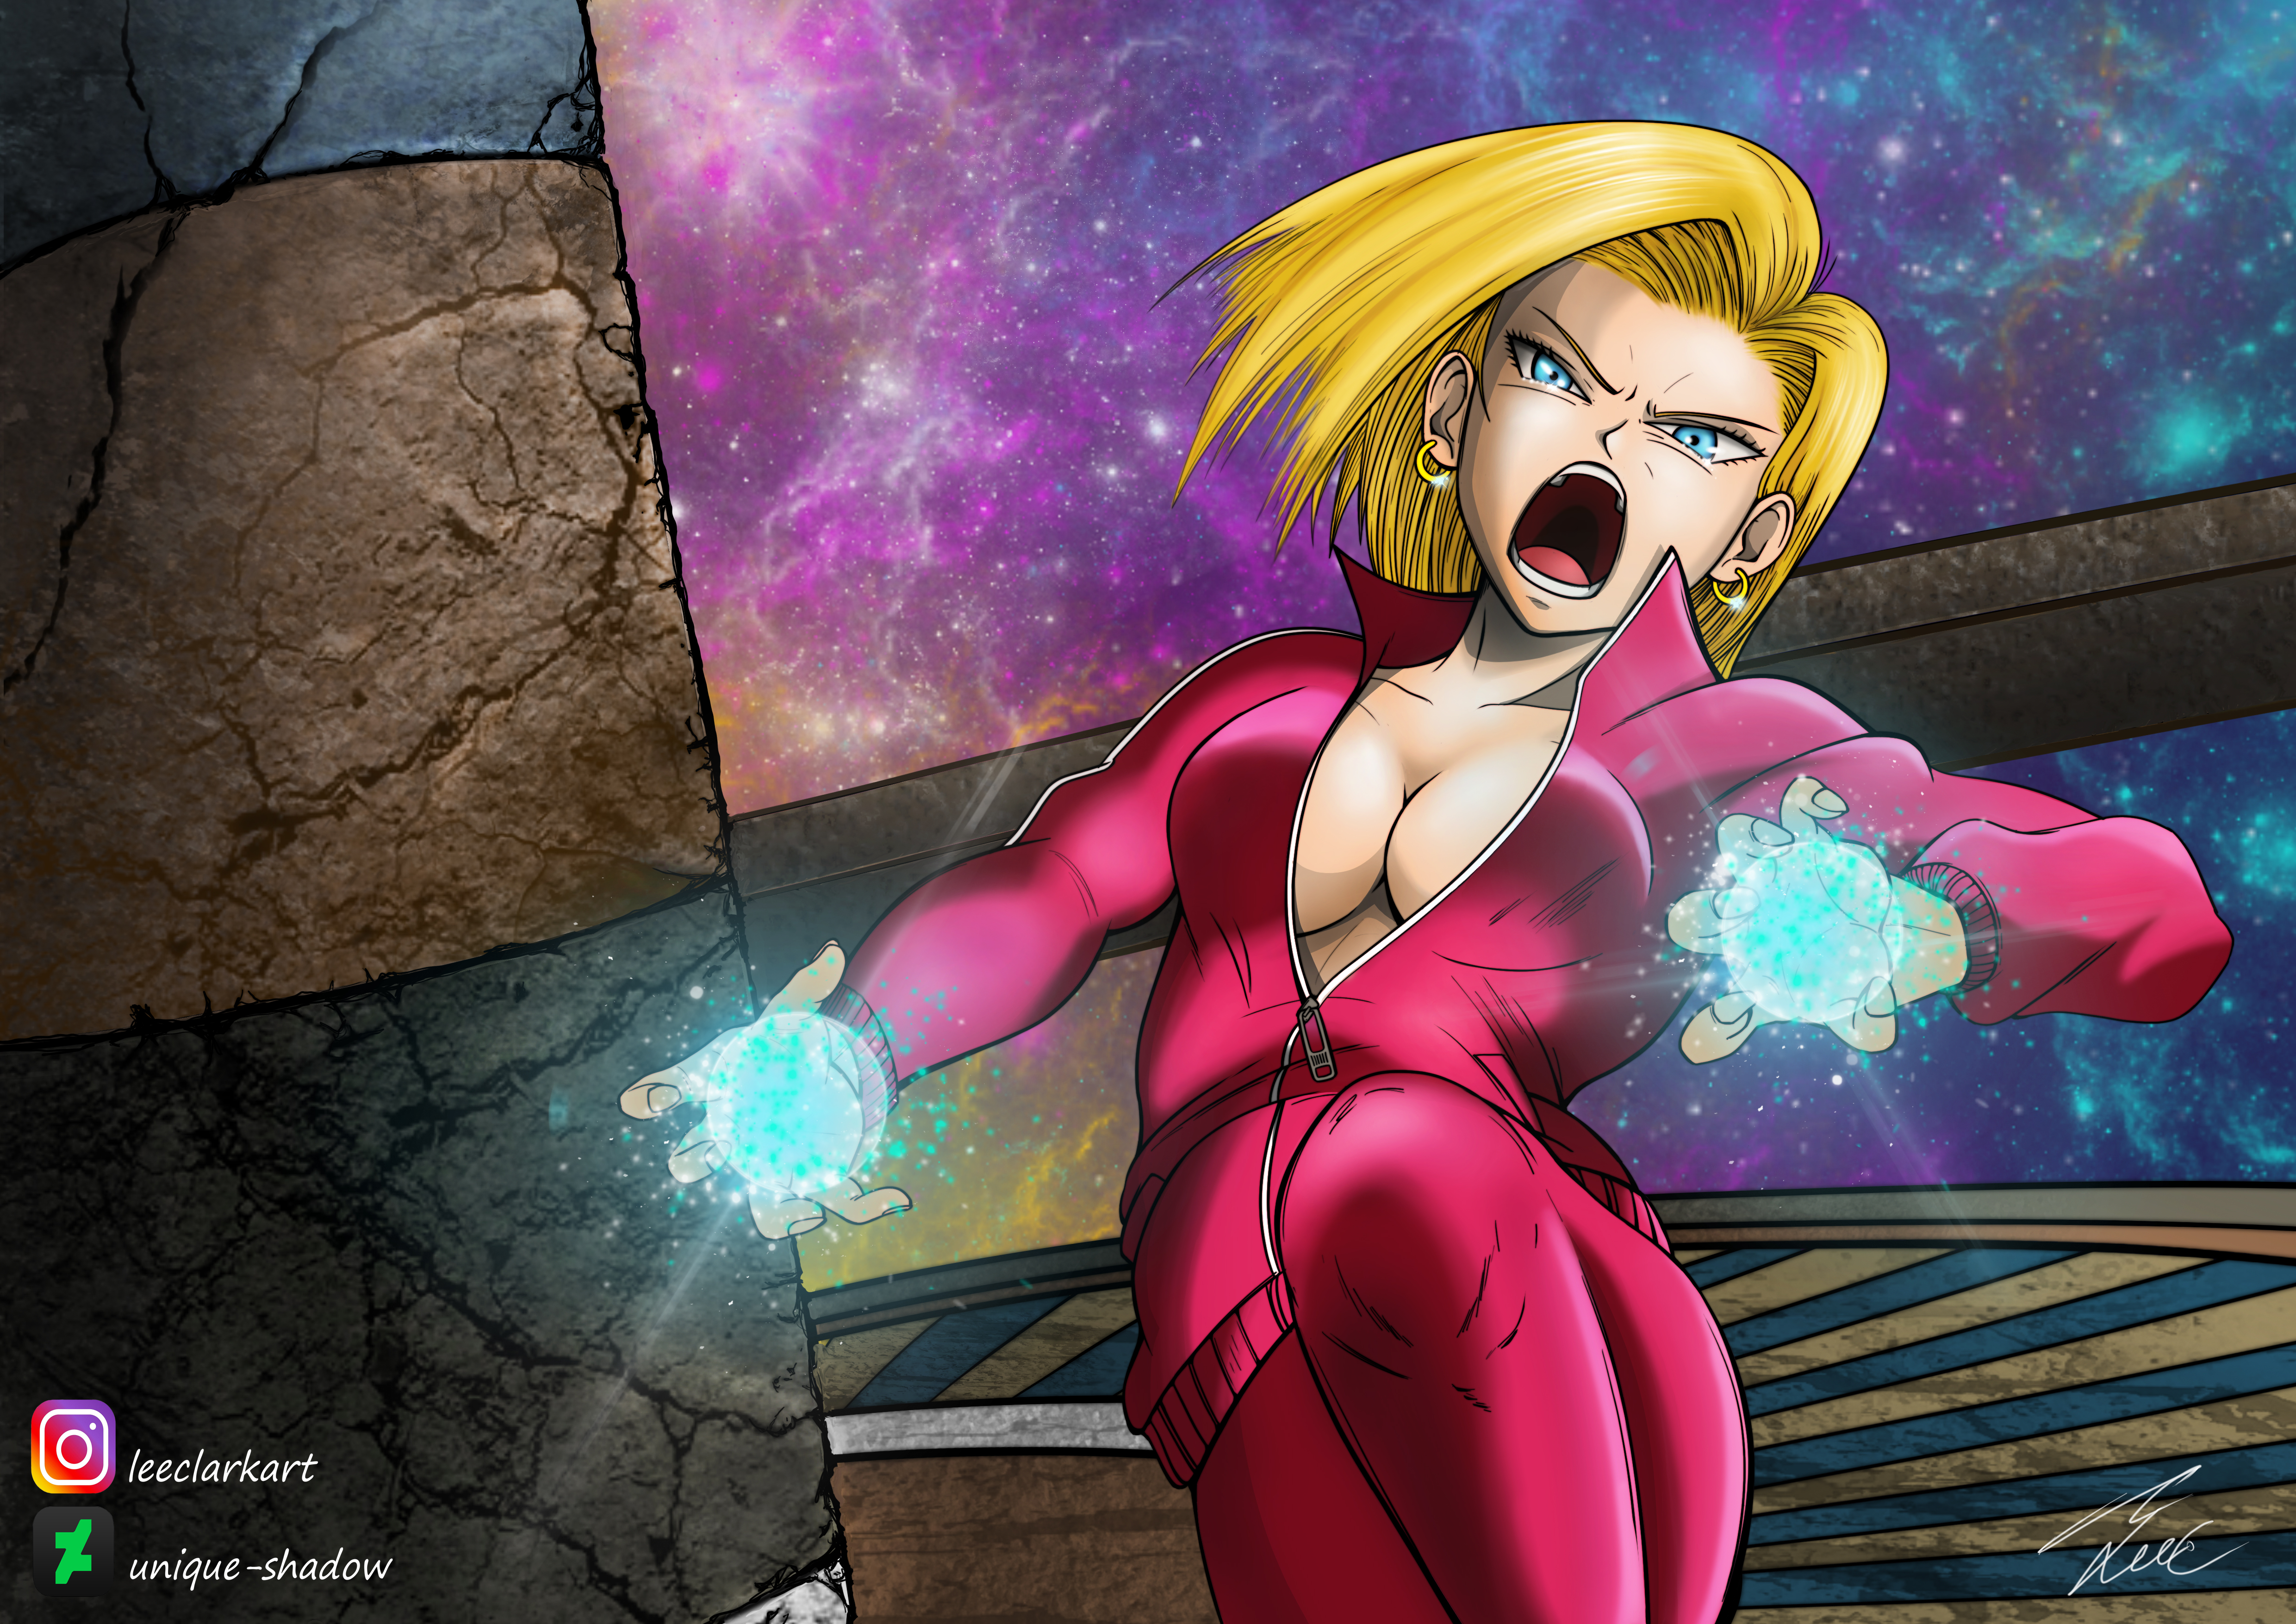 Android 32(After Joinning The Dragon Slayer Team) by jongar8 on DeviantArt